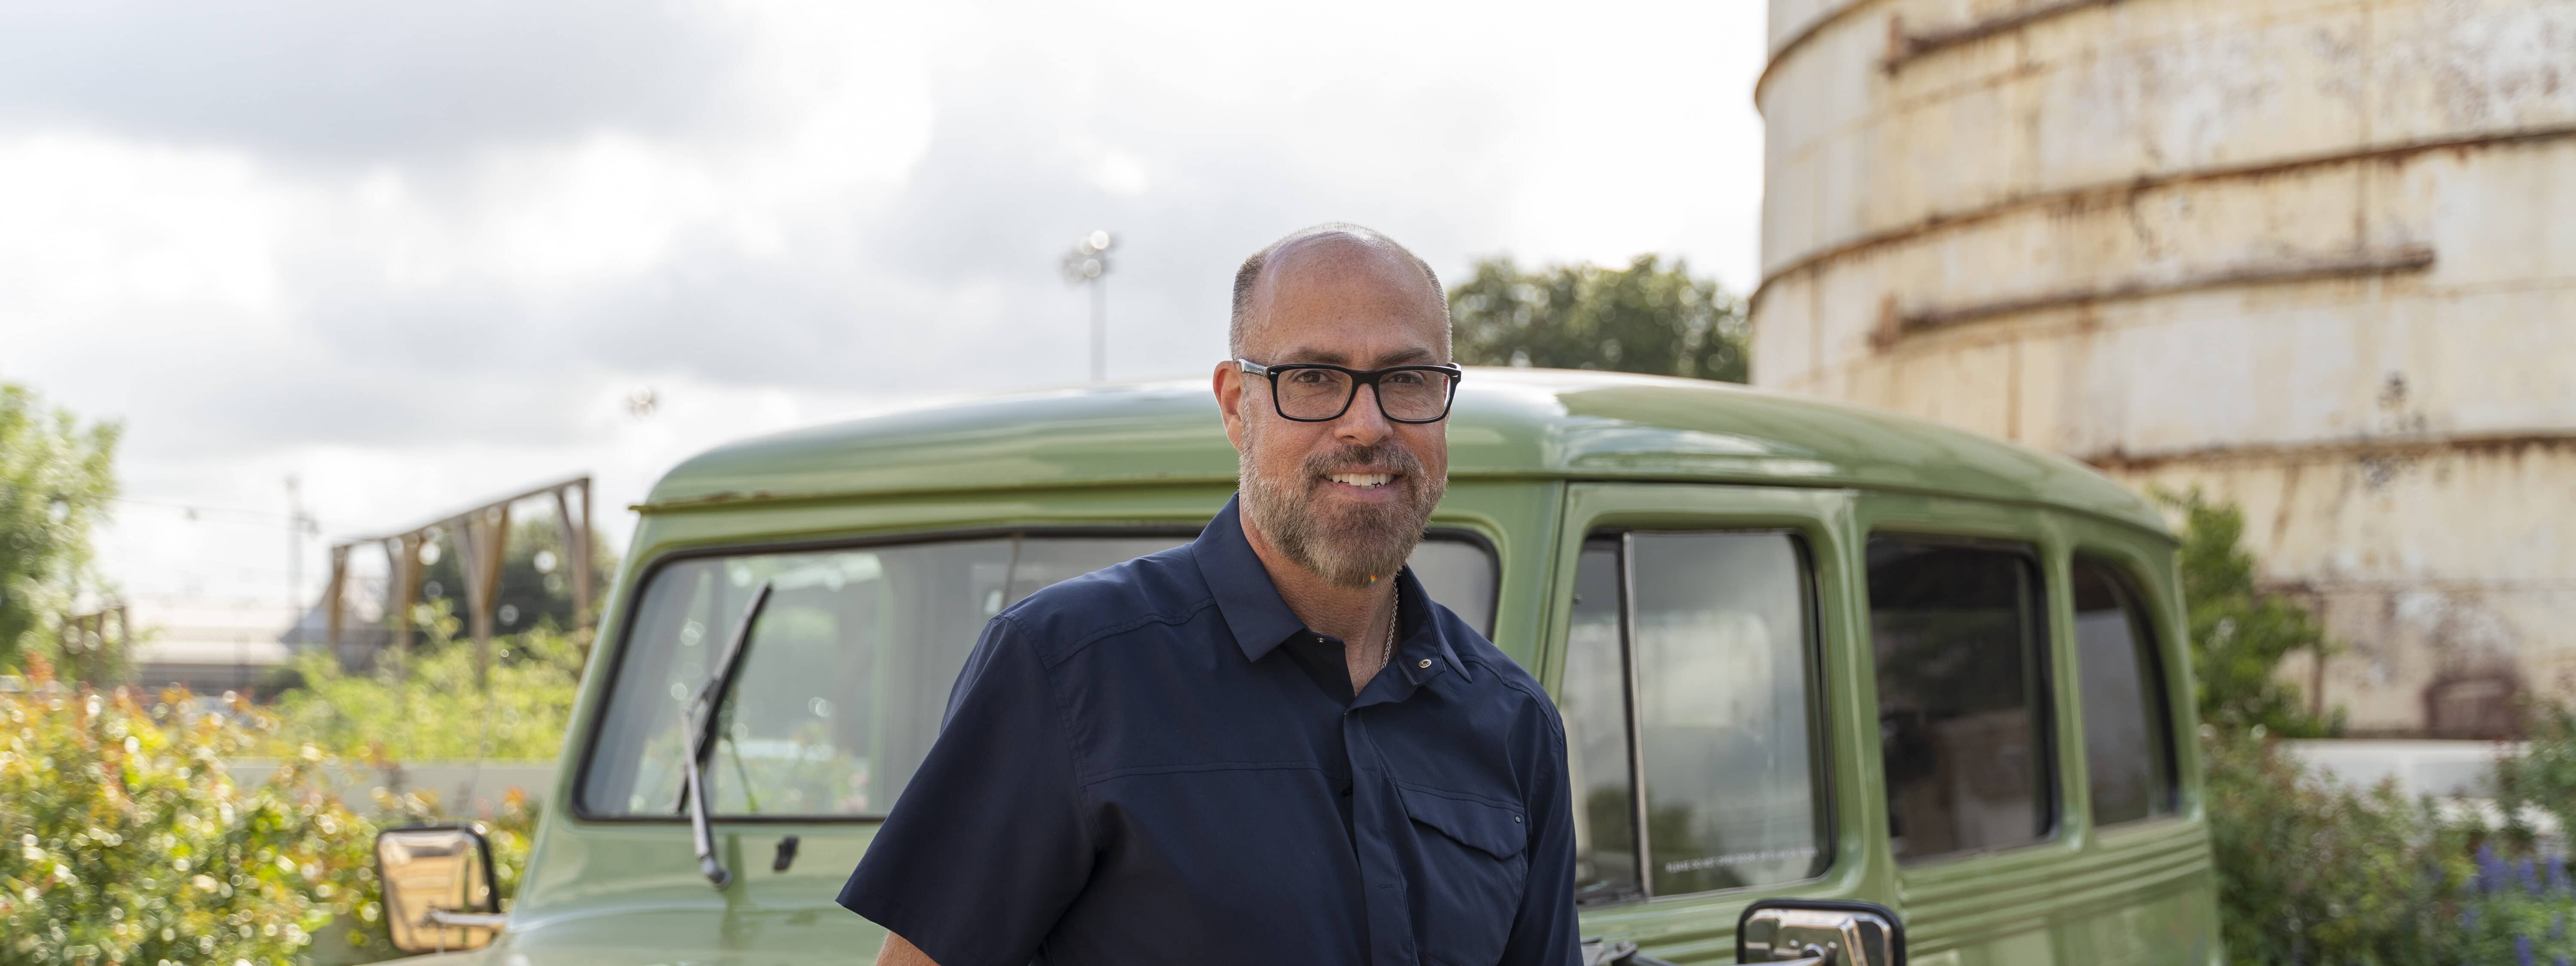 A man in glasses standing next to a green truck.